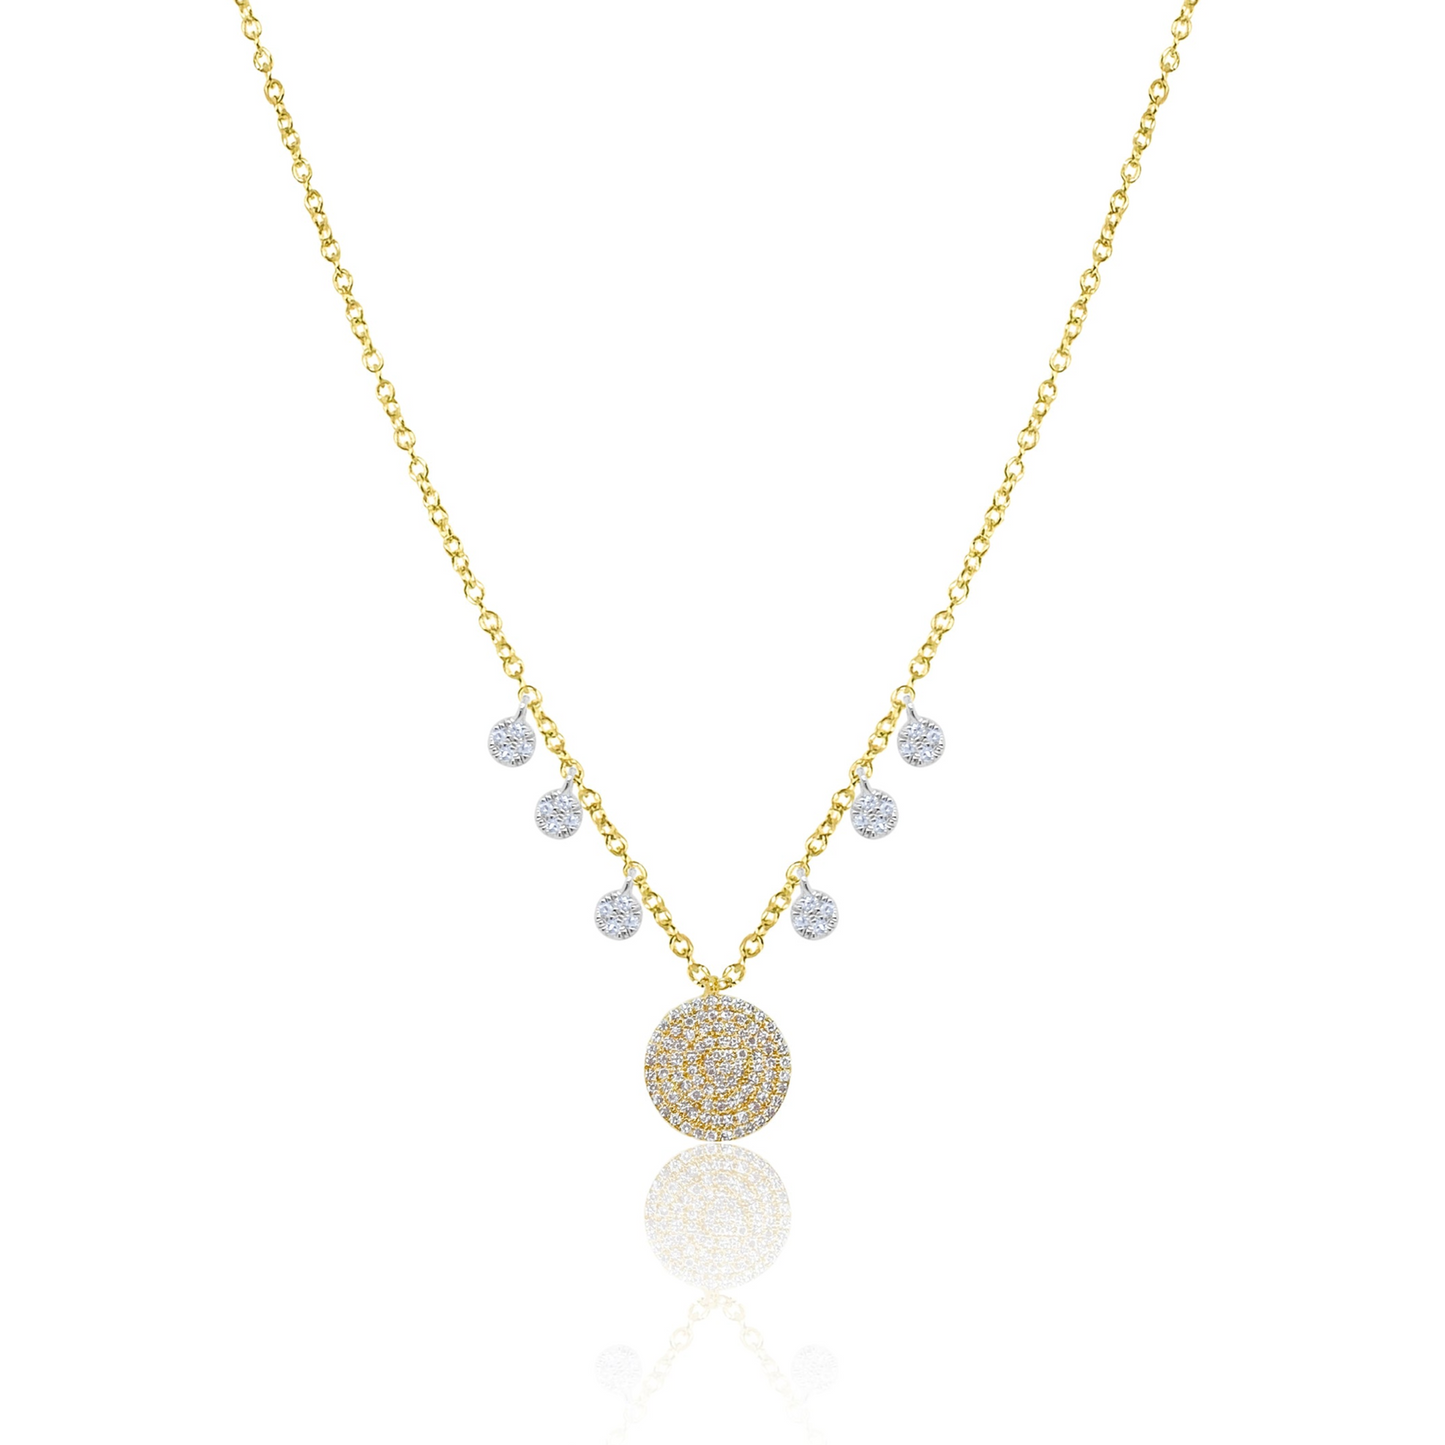 Meira T Designs | Yellow Gold Pave Diamond Disc Necklace with Charms